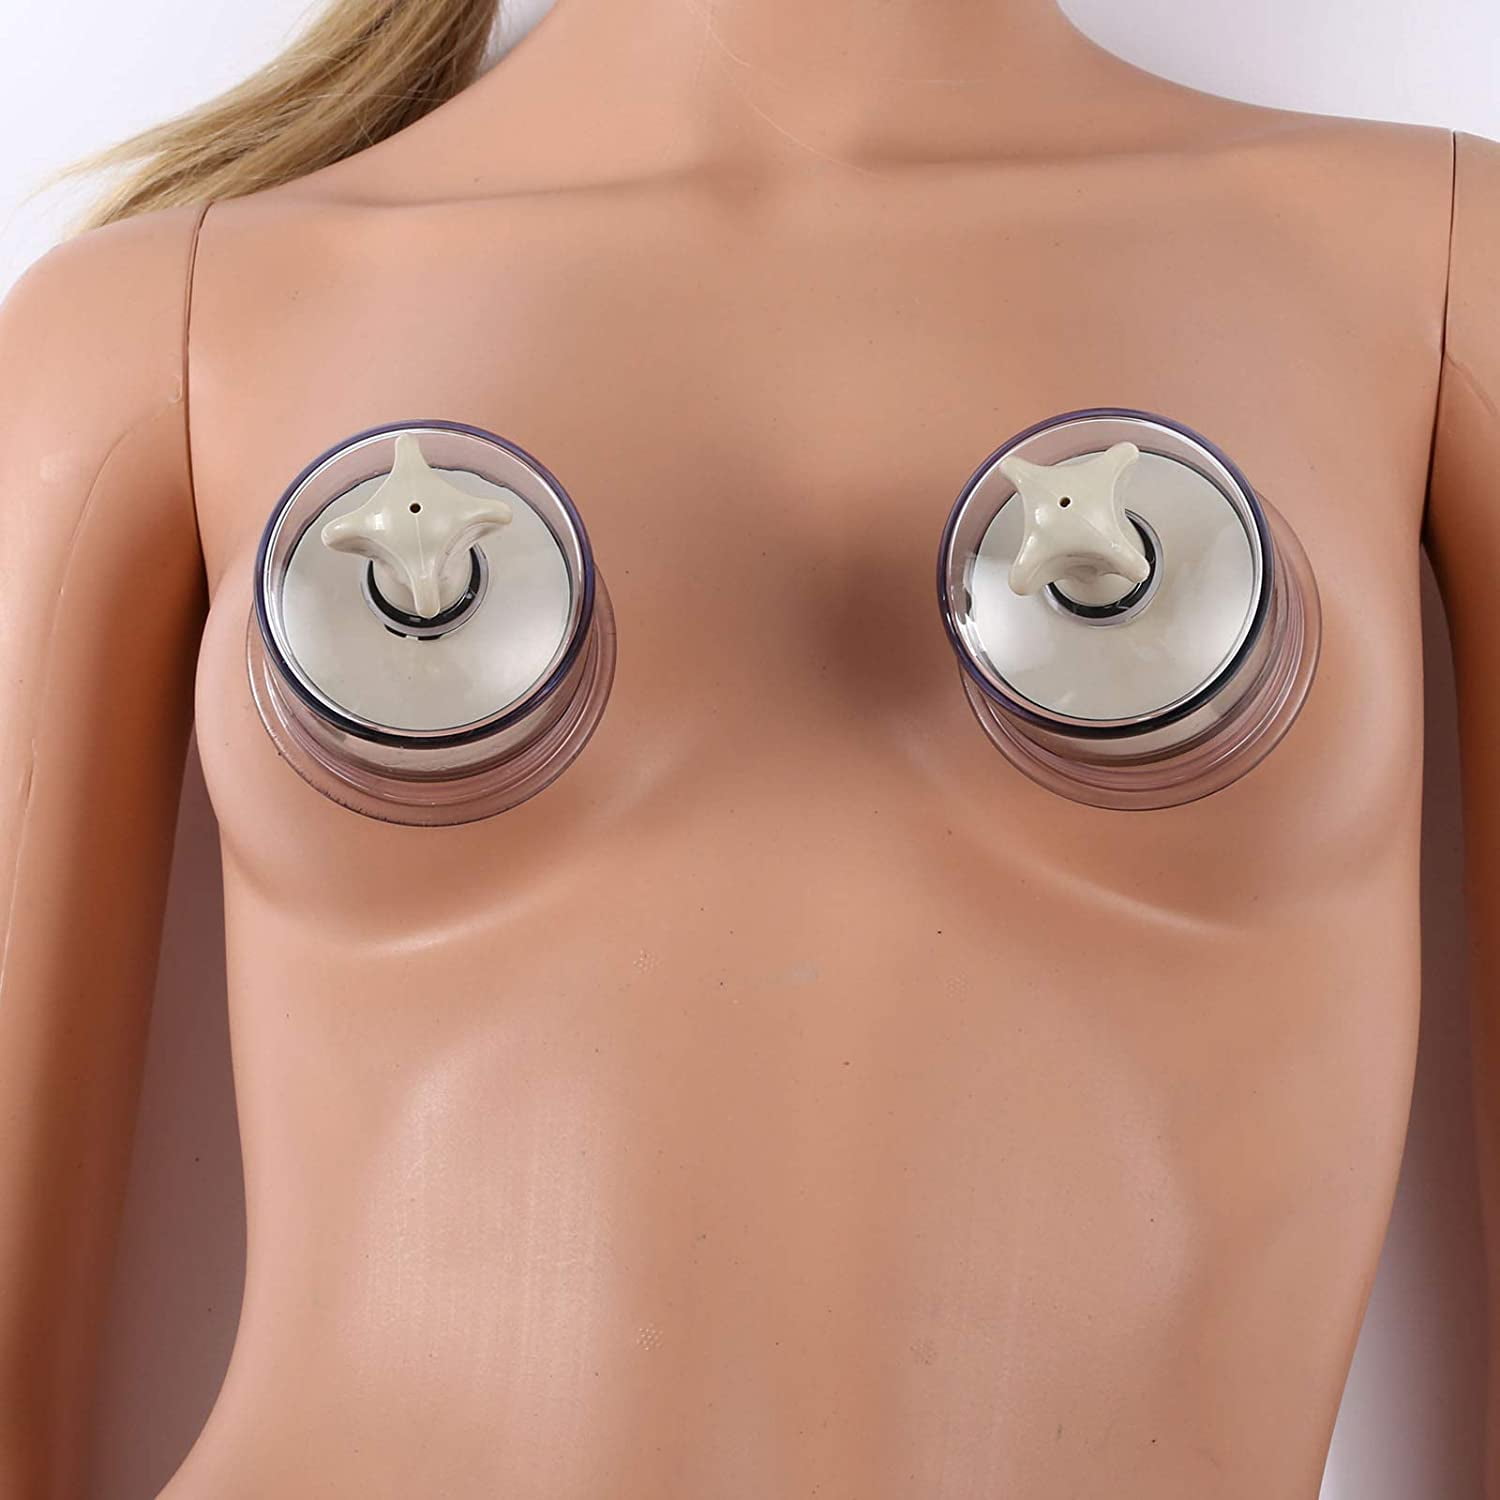 doug penta recommends Nipple Suction Cups